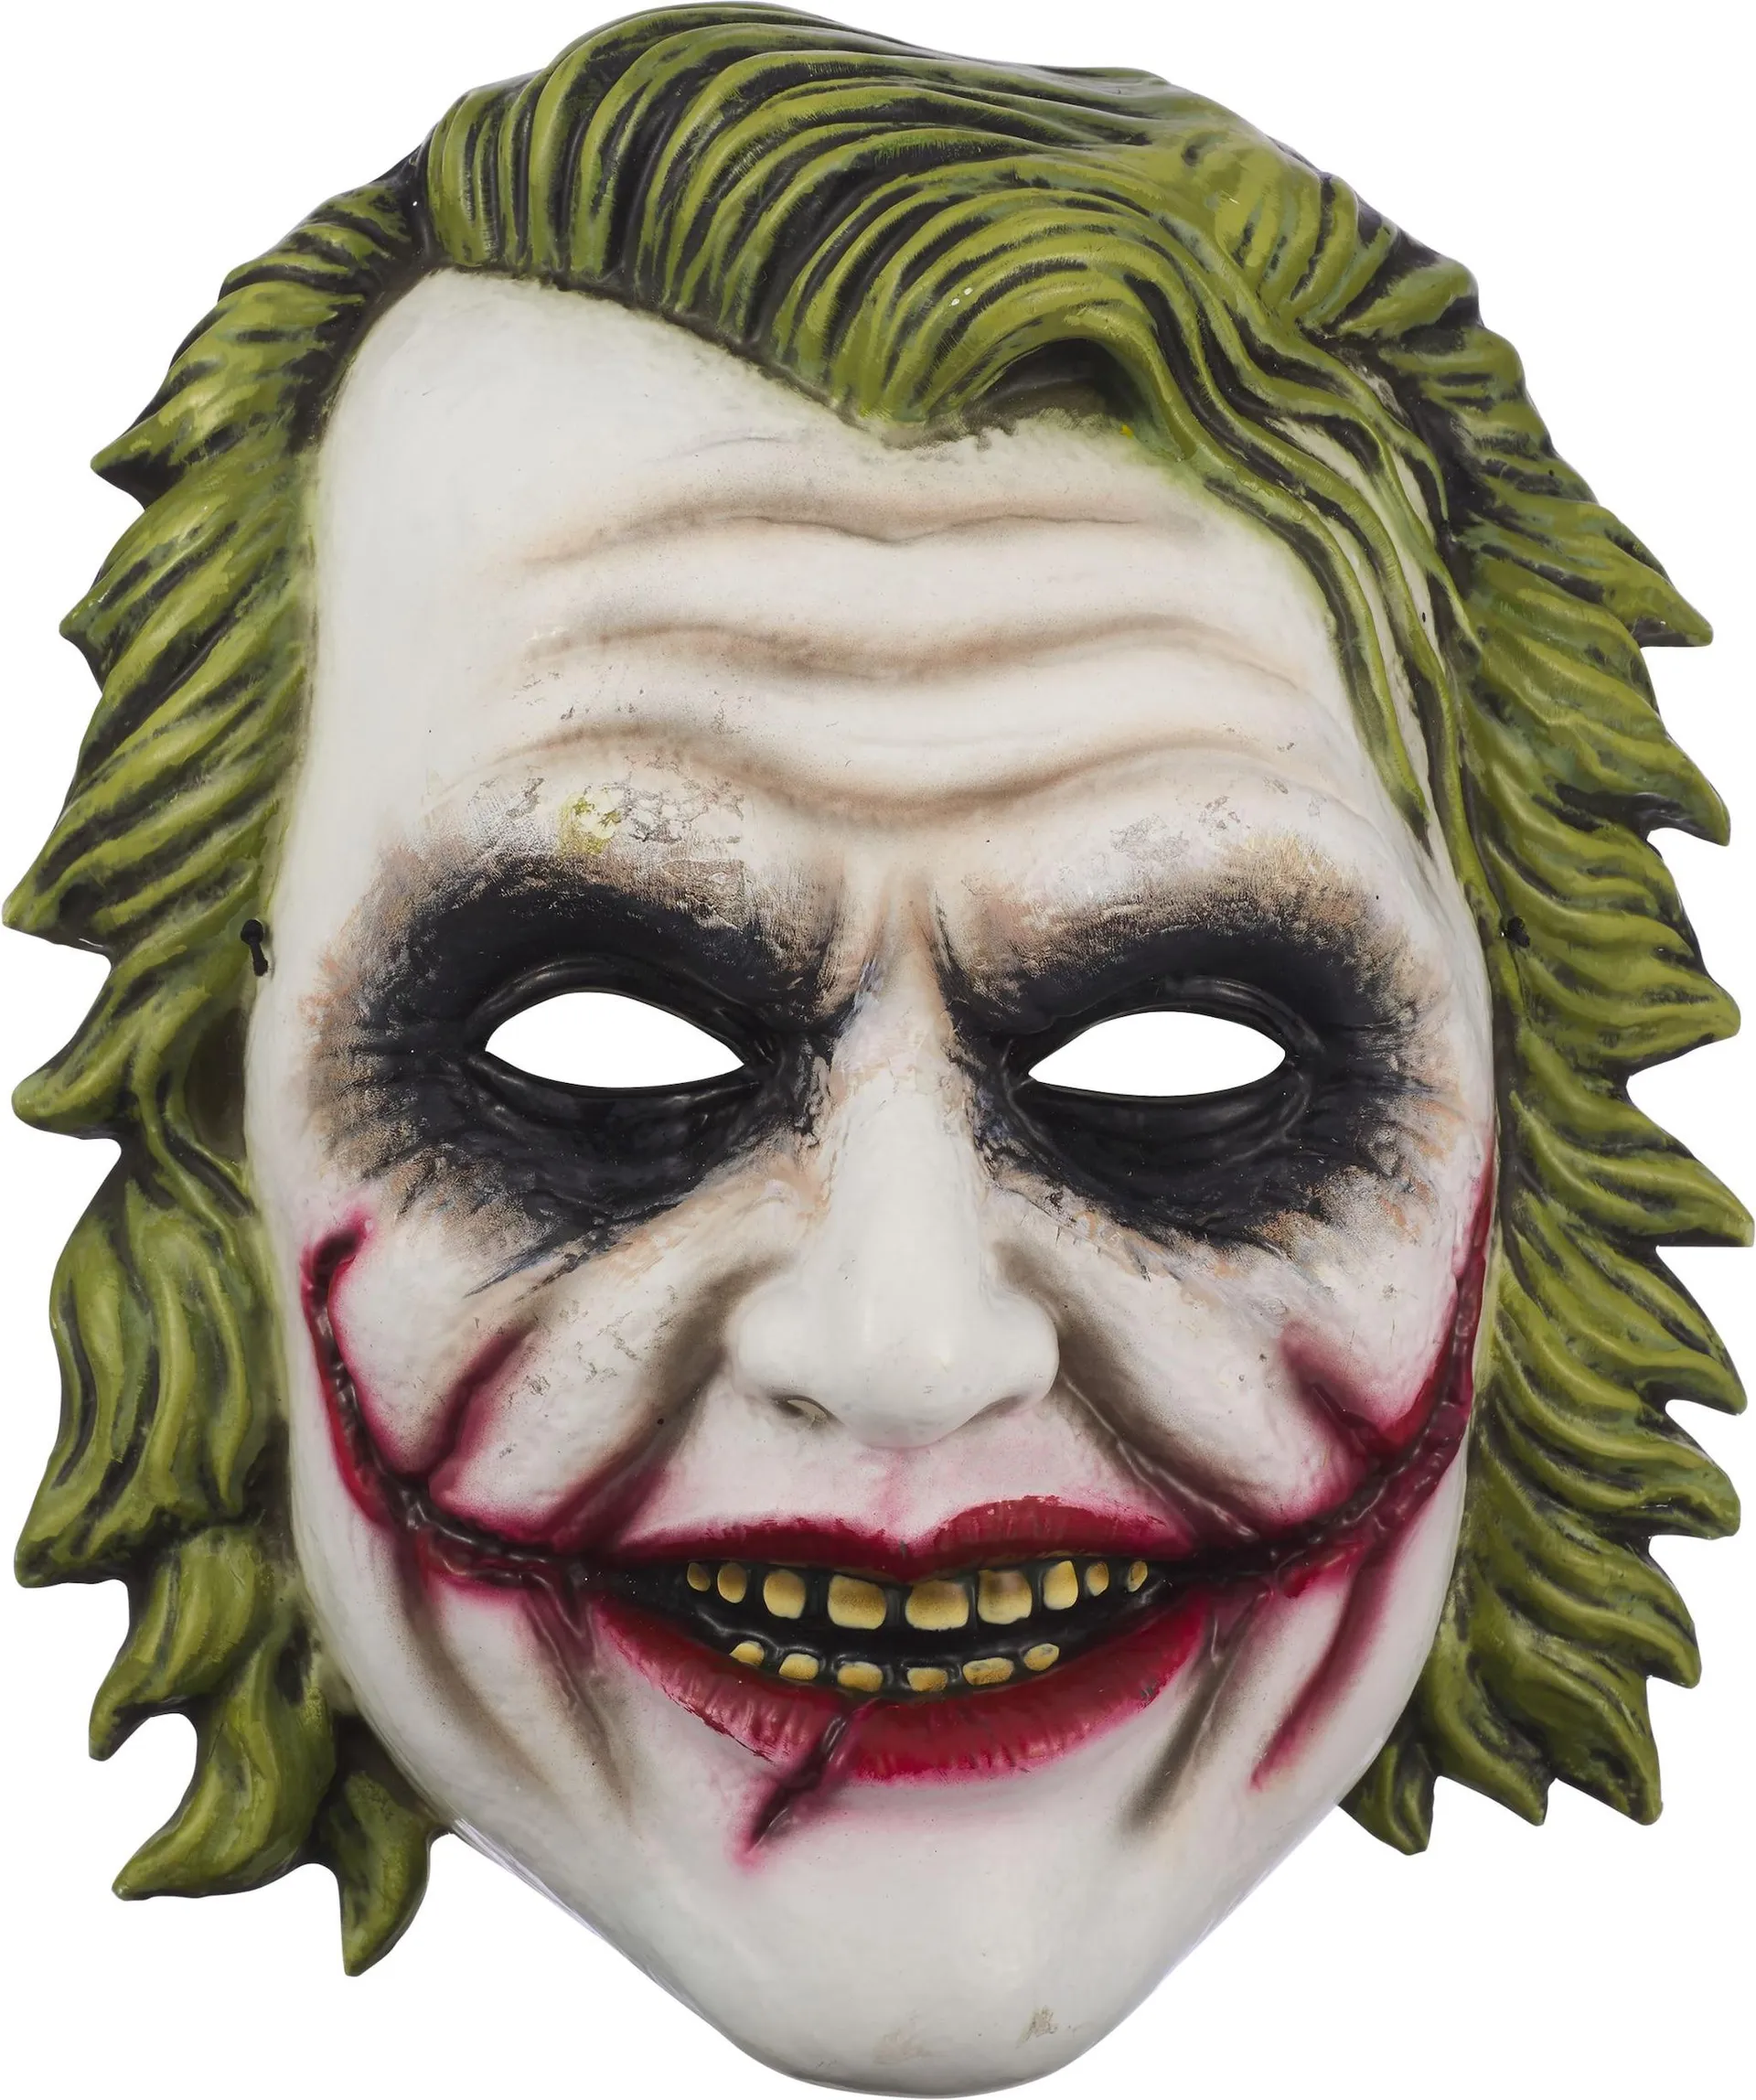 DC The Dark Knight Joker Plastic Mask, Green/White, One Size, Wearable Costume Accessory for Halloween